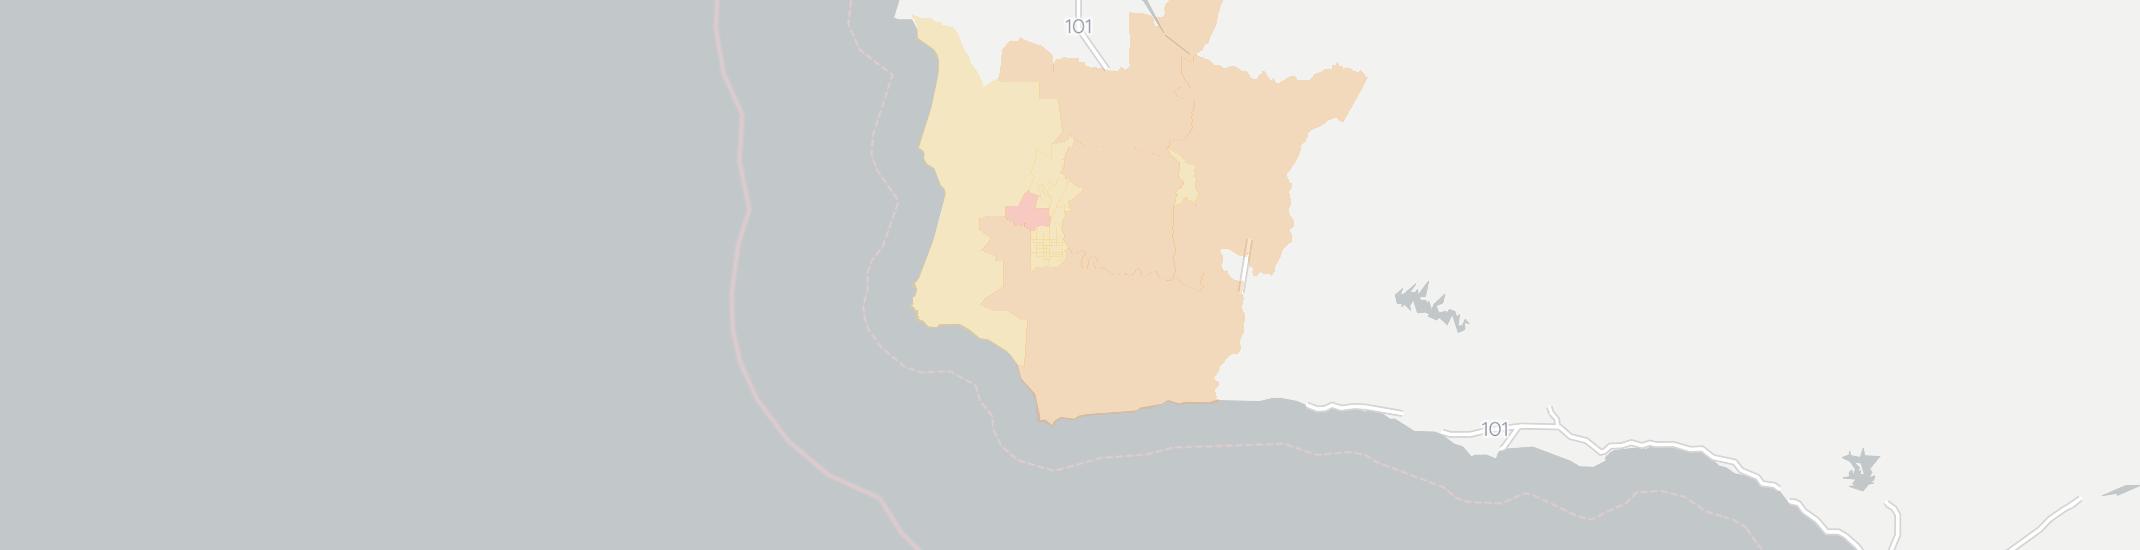 Lompoc Internet Competition Map. Click for interactive map